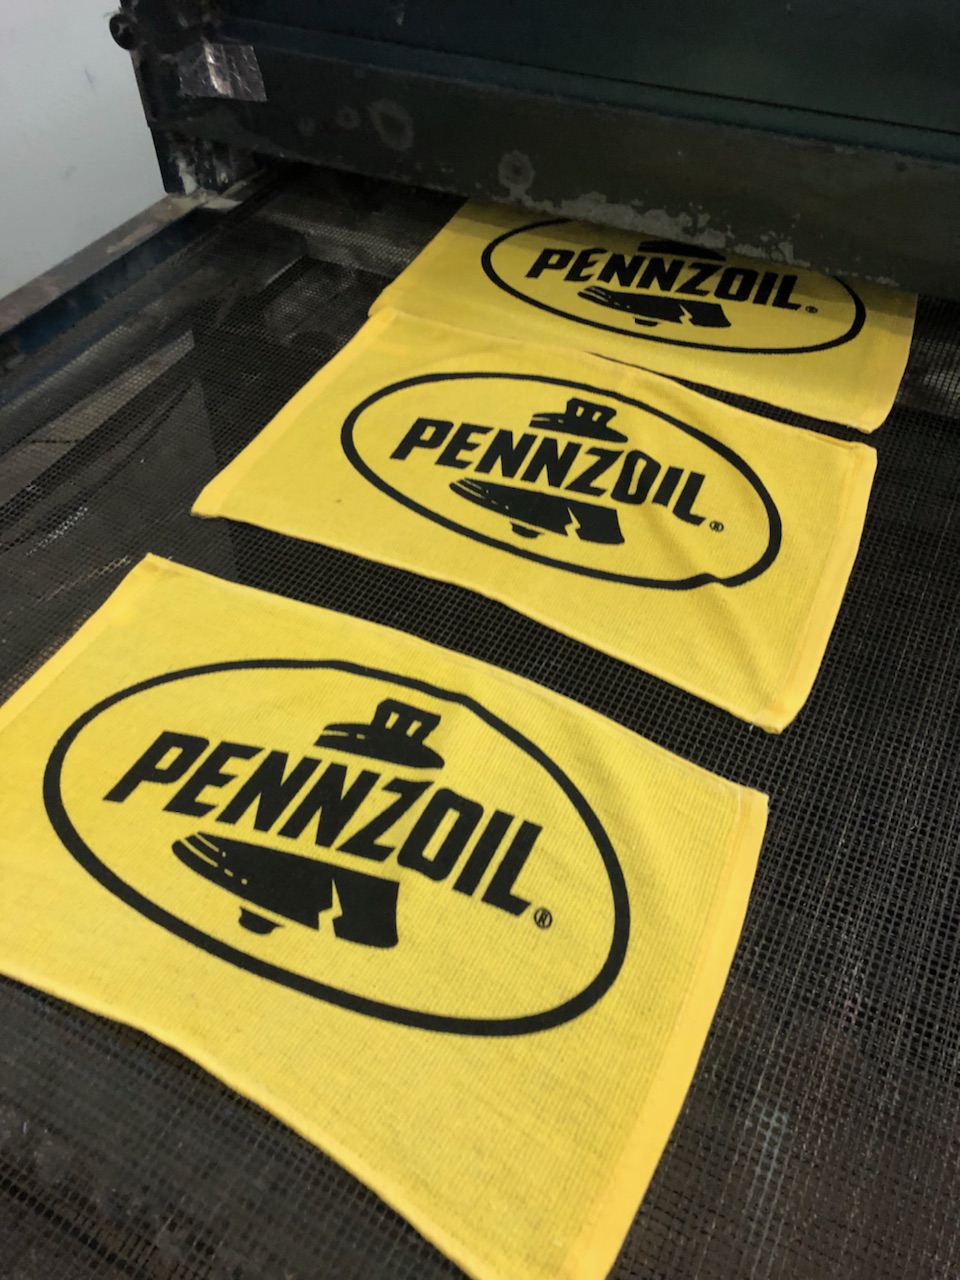 Common Questions About Rally Towels